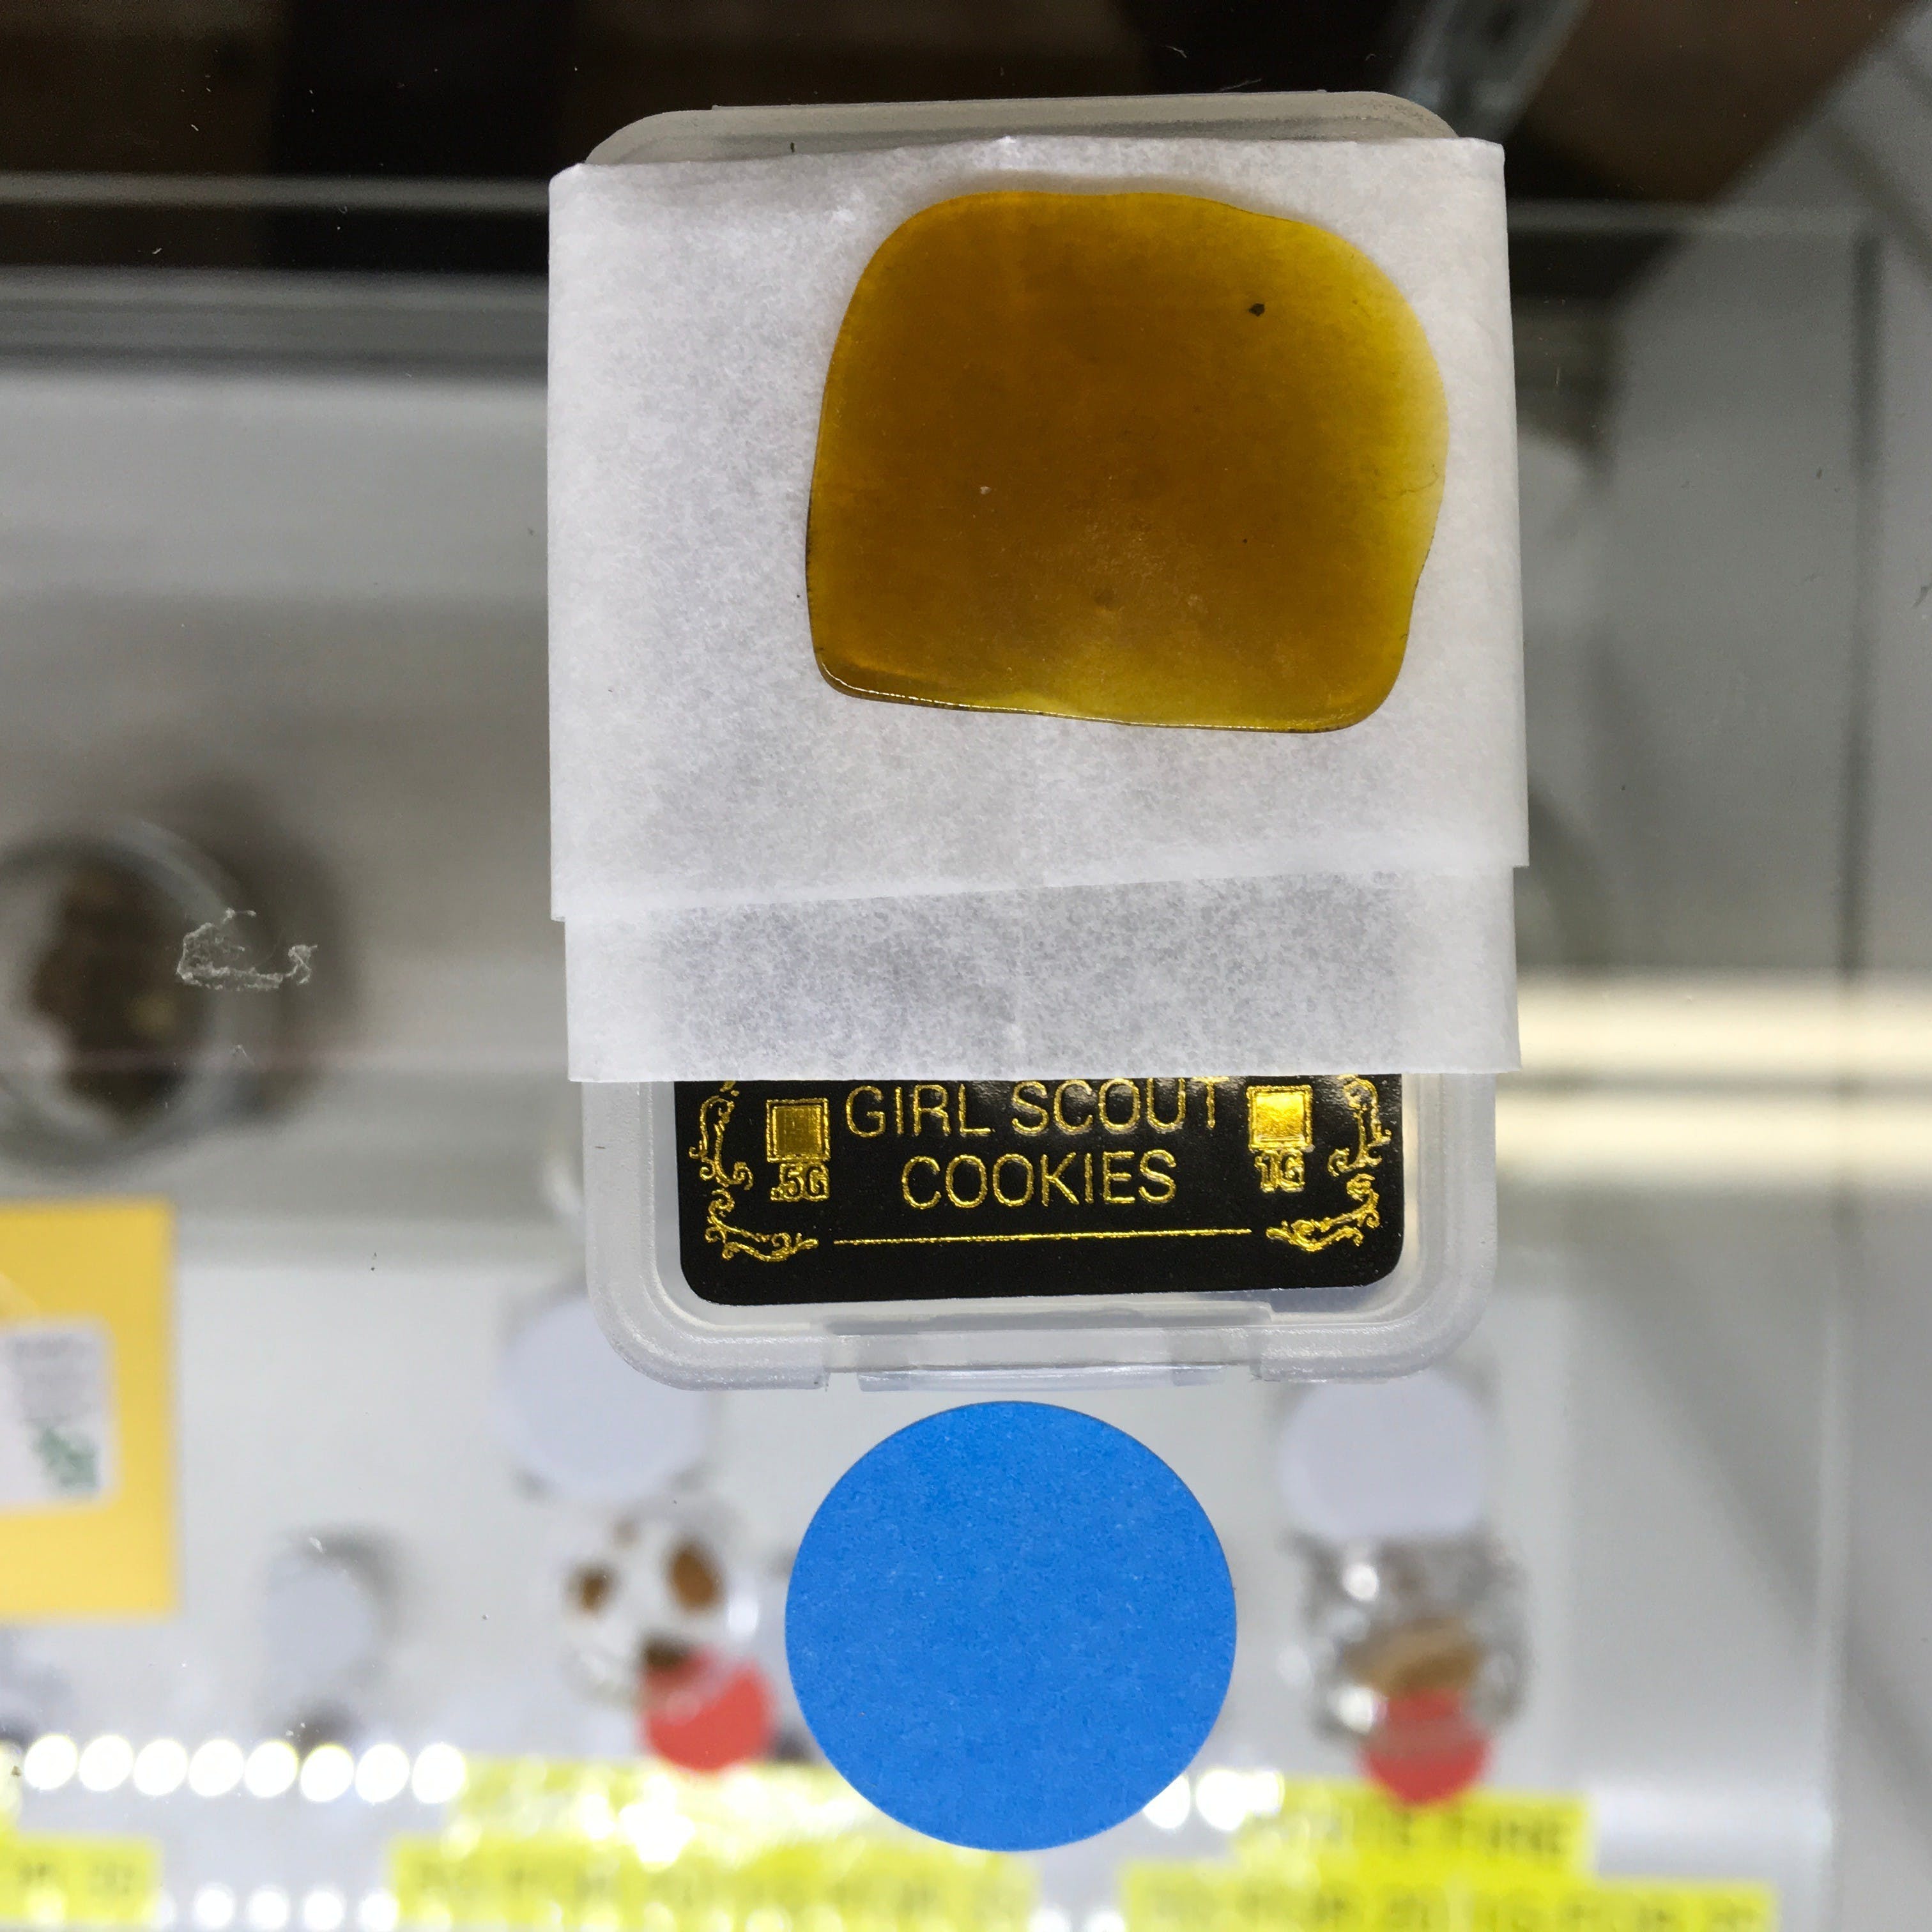 Girl Scout Cookie LA420 Shatter